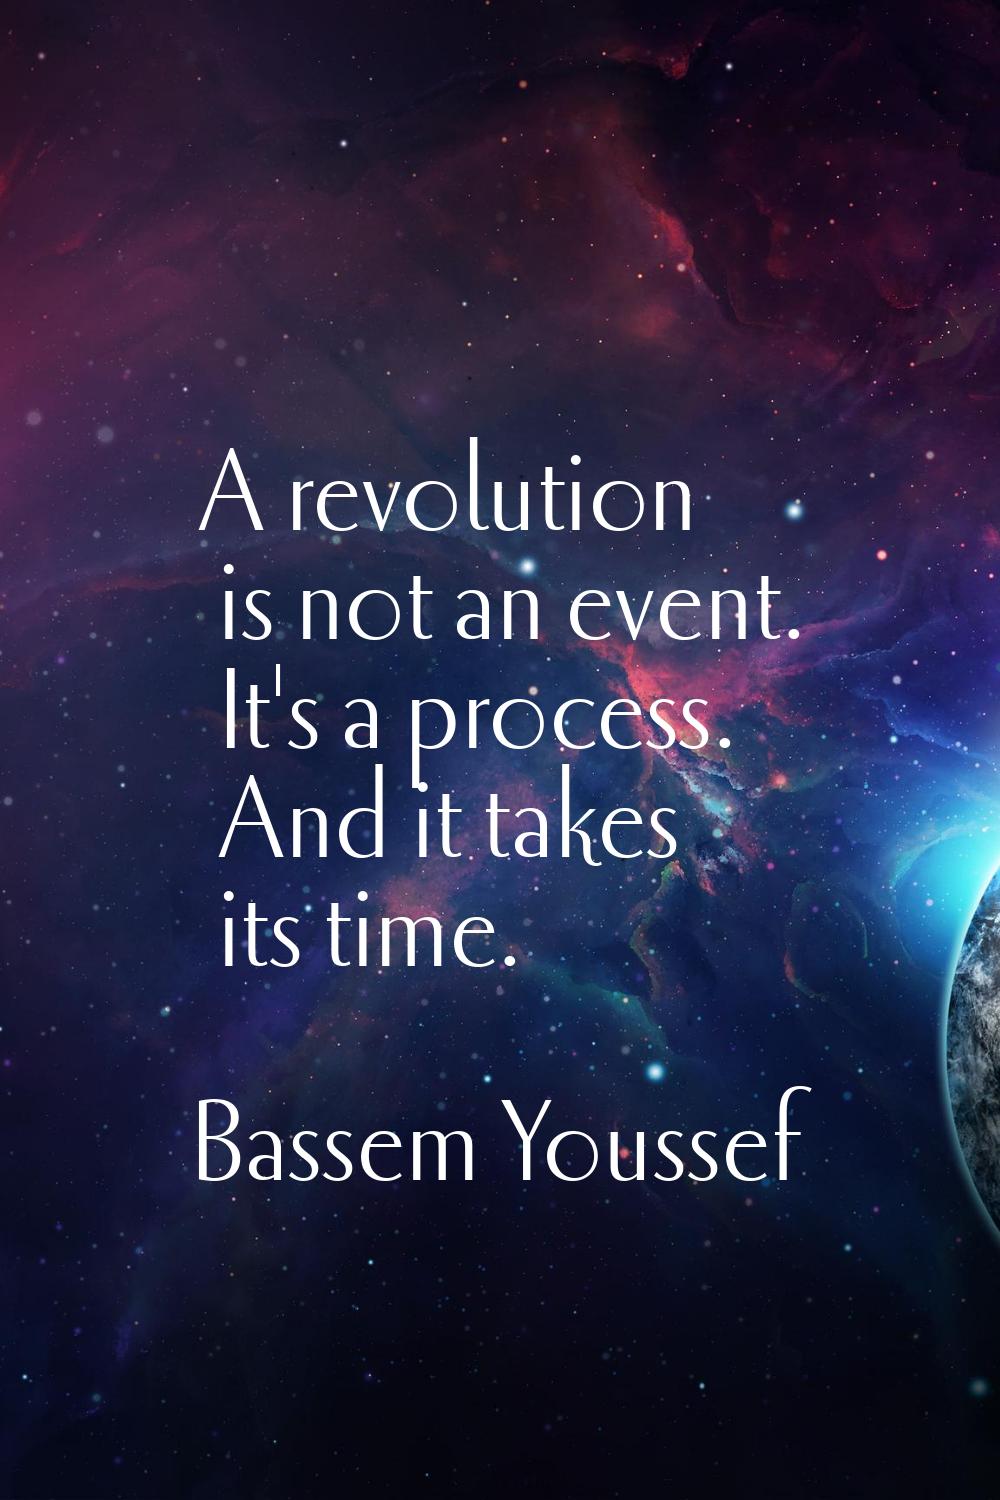 A revolution is not an event. It's a process. And it takes its time.